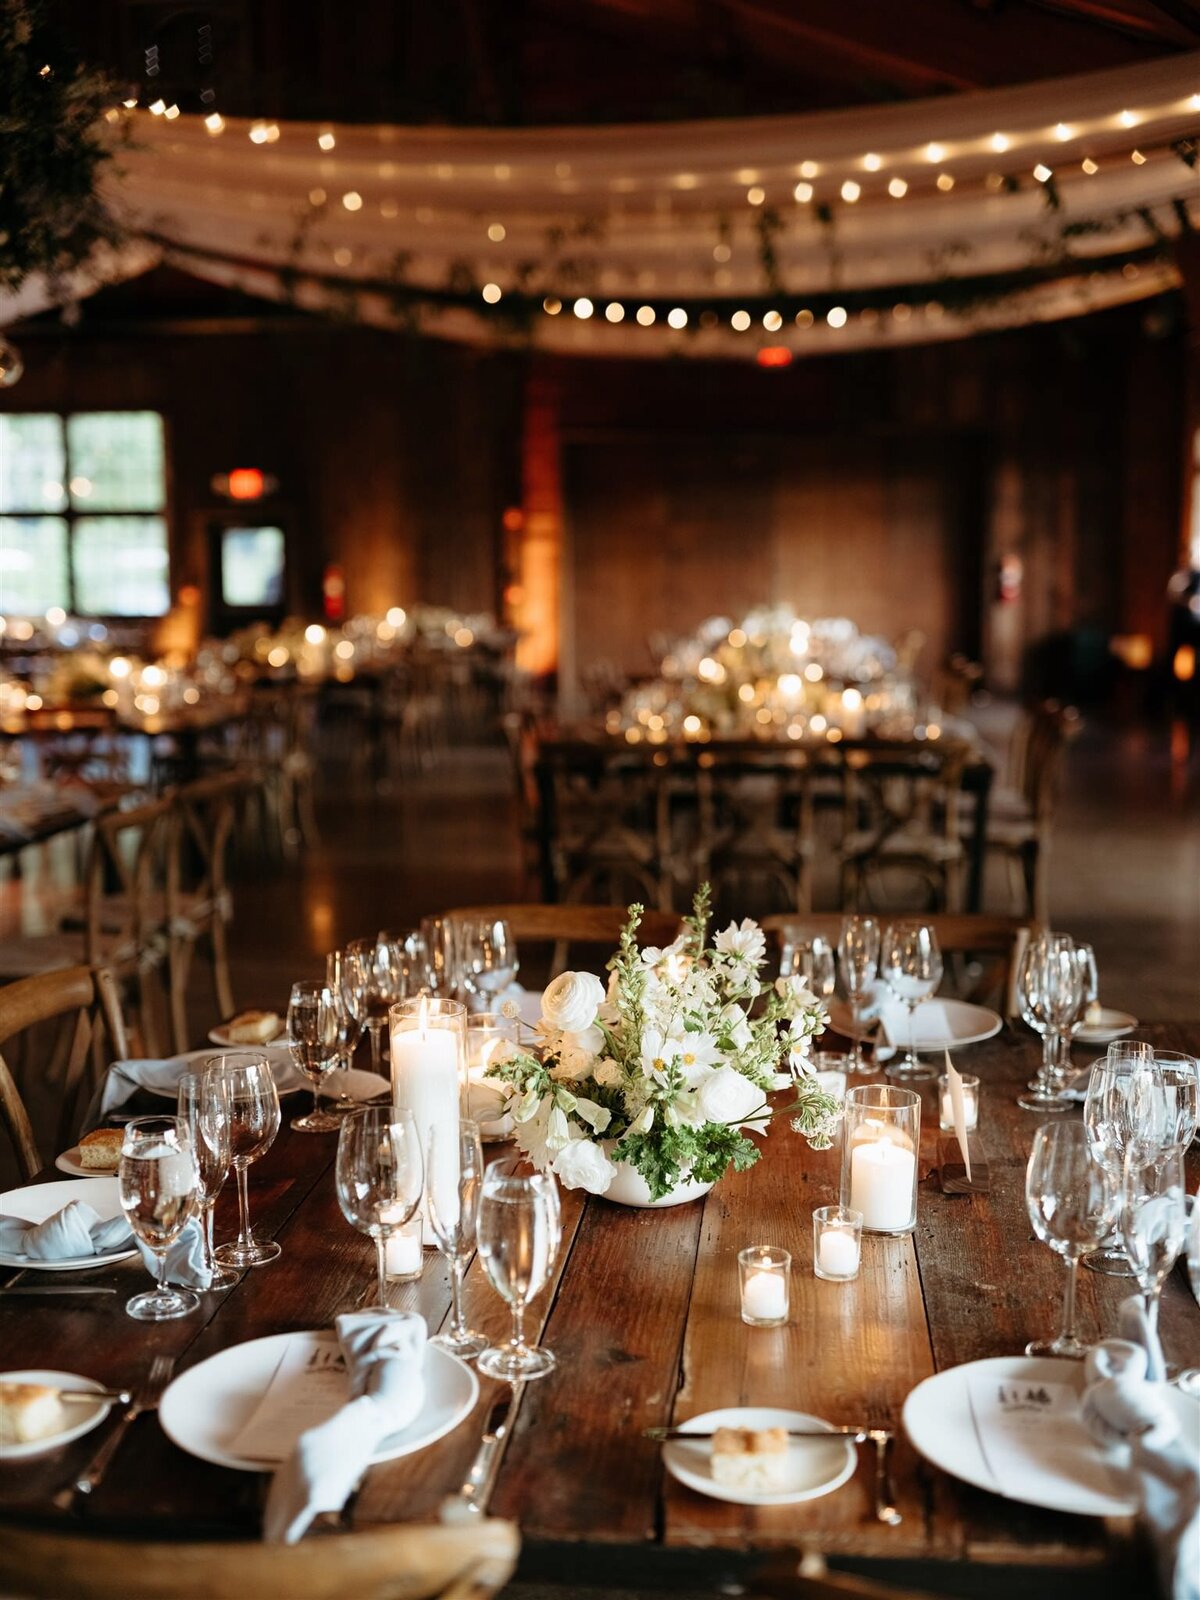 Cedar Lakes Estate wedding venue reception closeup of candle-lit tablescape on wooden farm table, under chandeliers, twinkle lights, draped white fabric, and botanical swags.